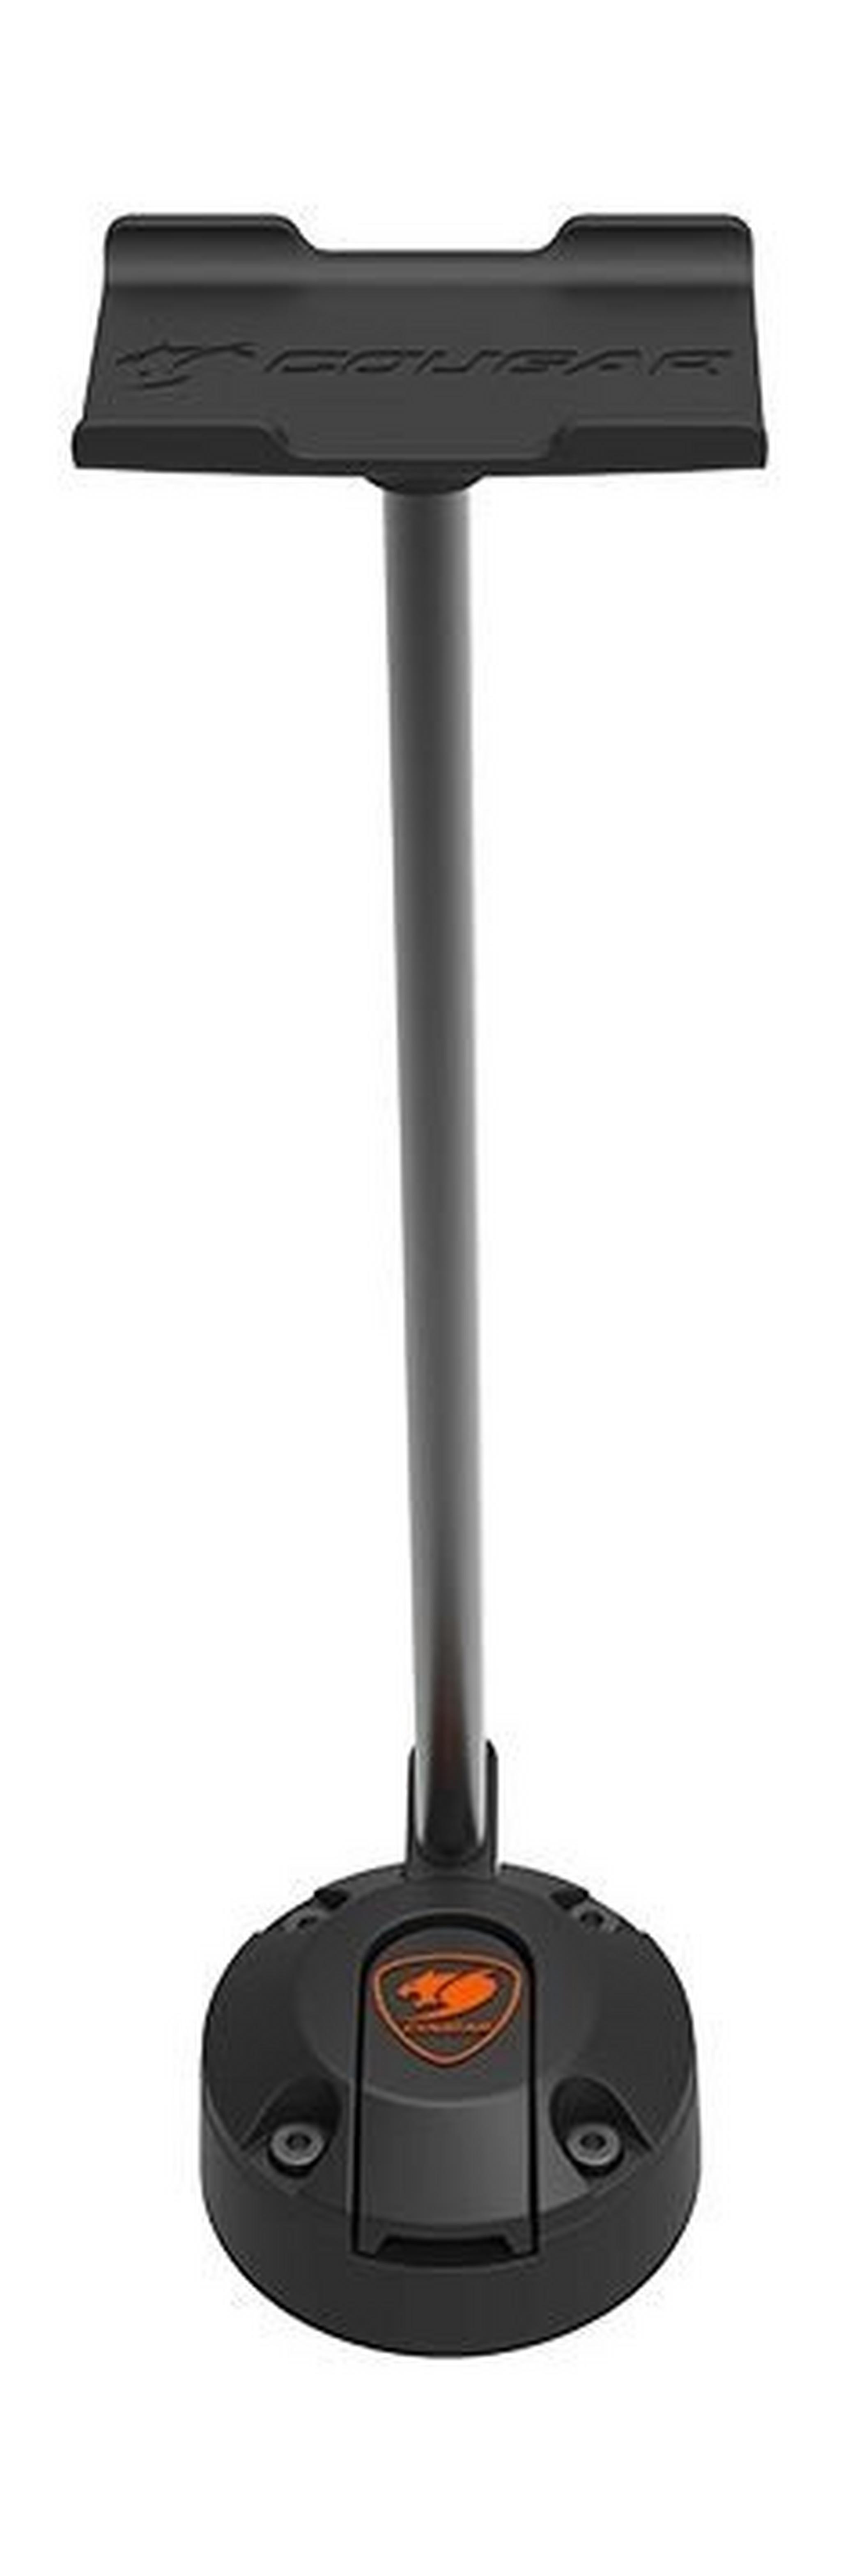 Cougar Bunker S Vacuum Headset Stand